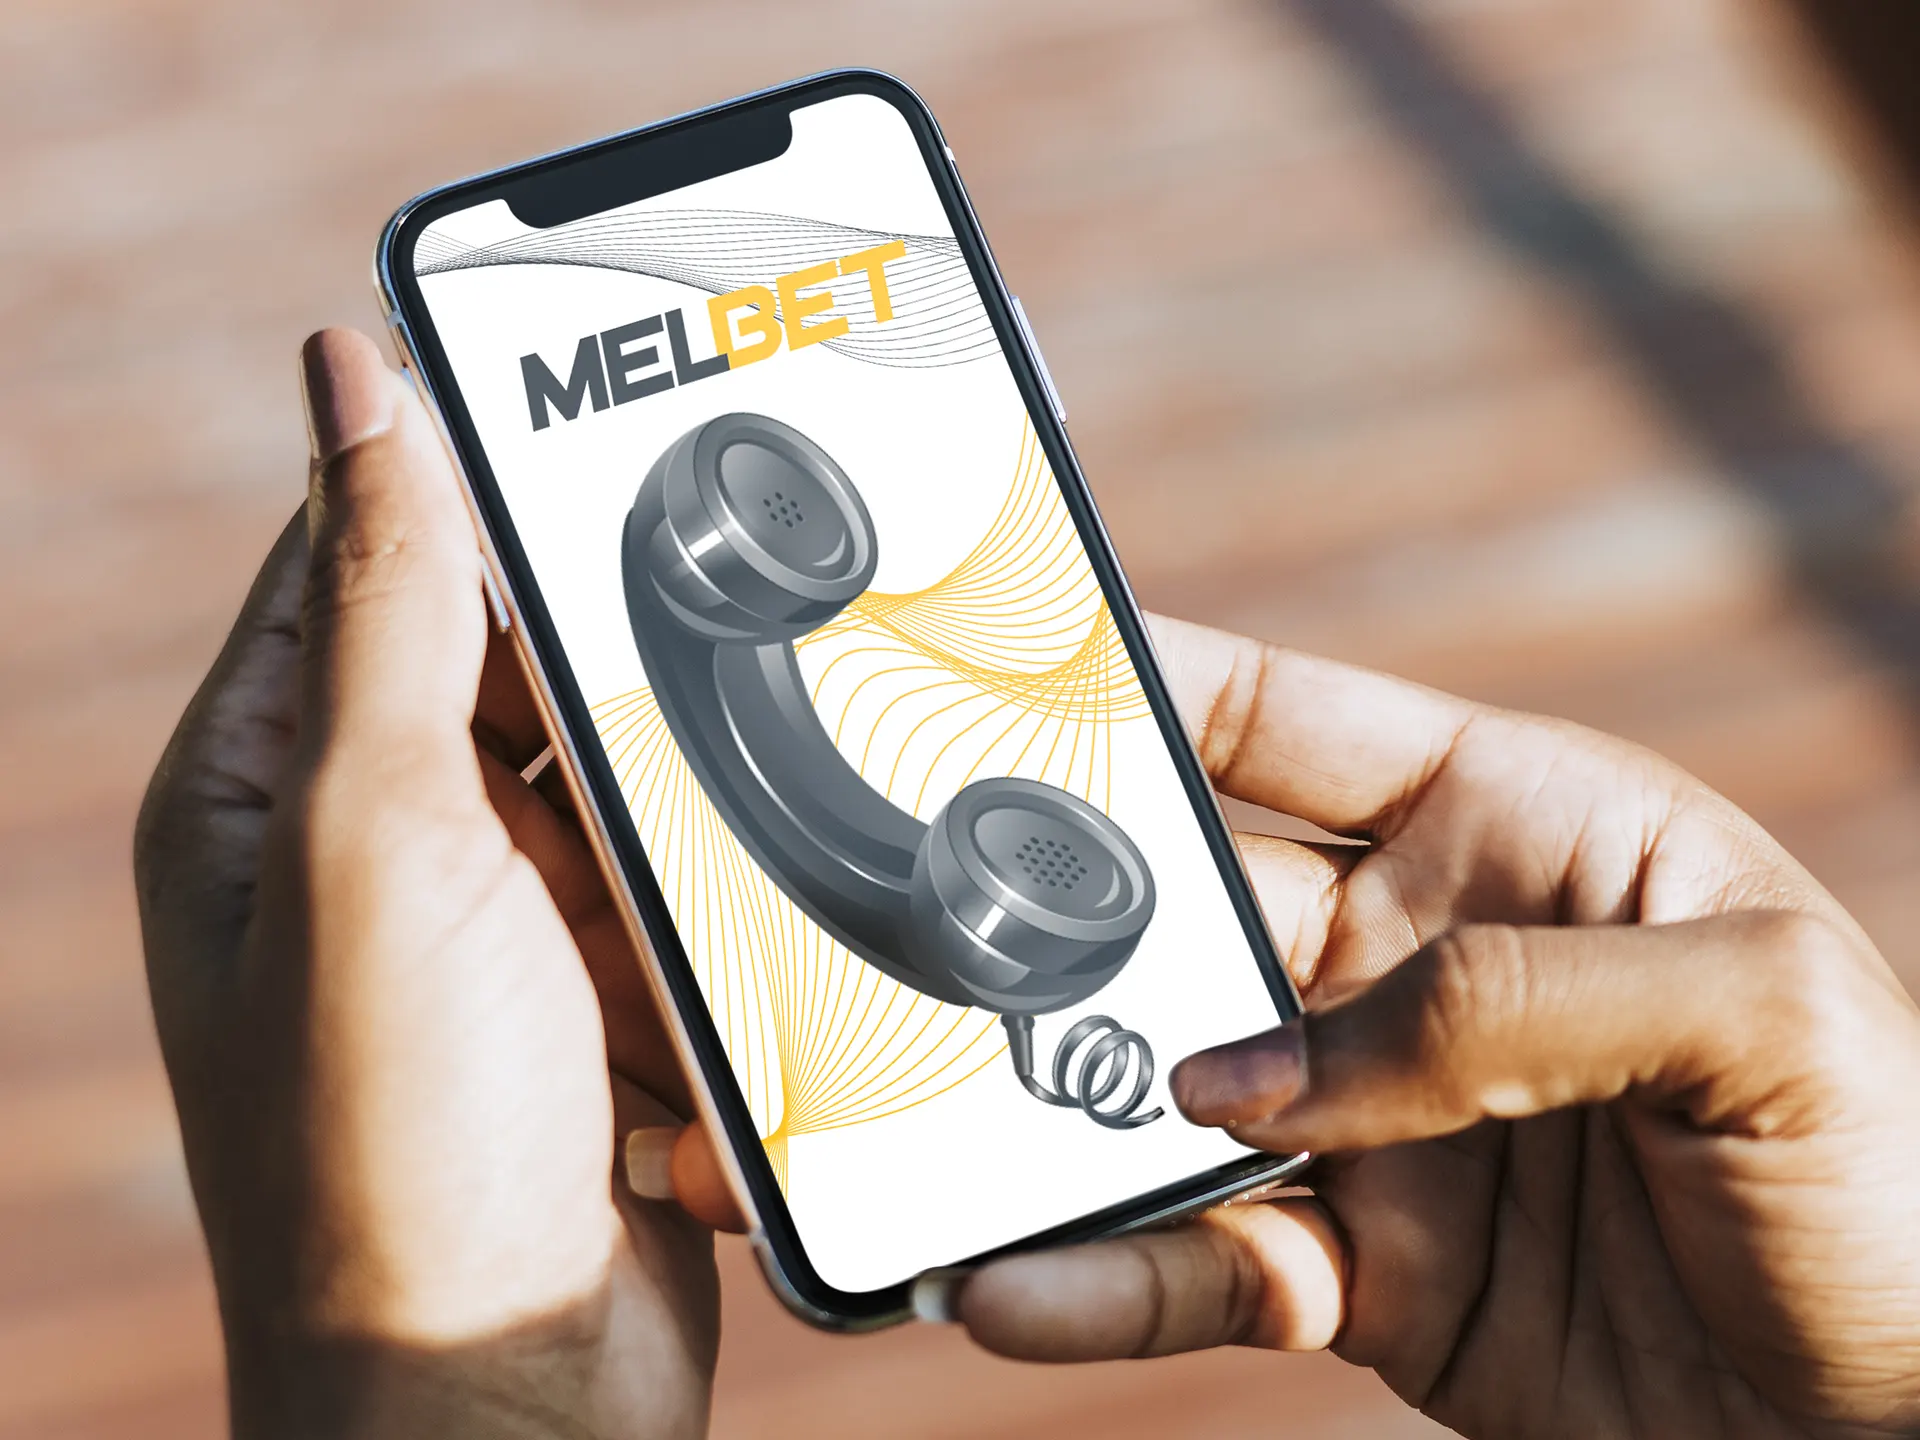 Call Mellbet support and get help.